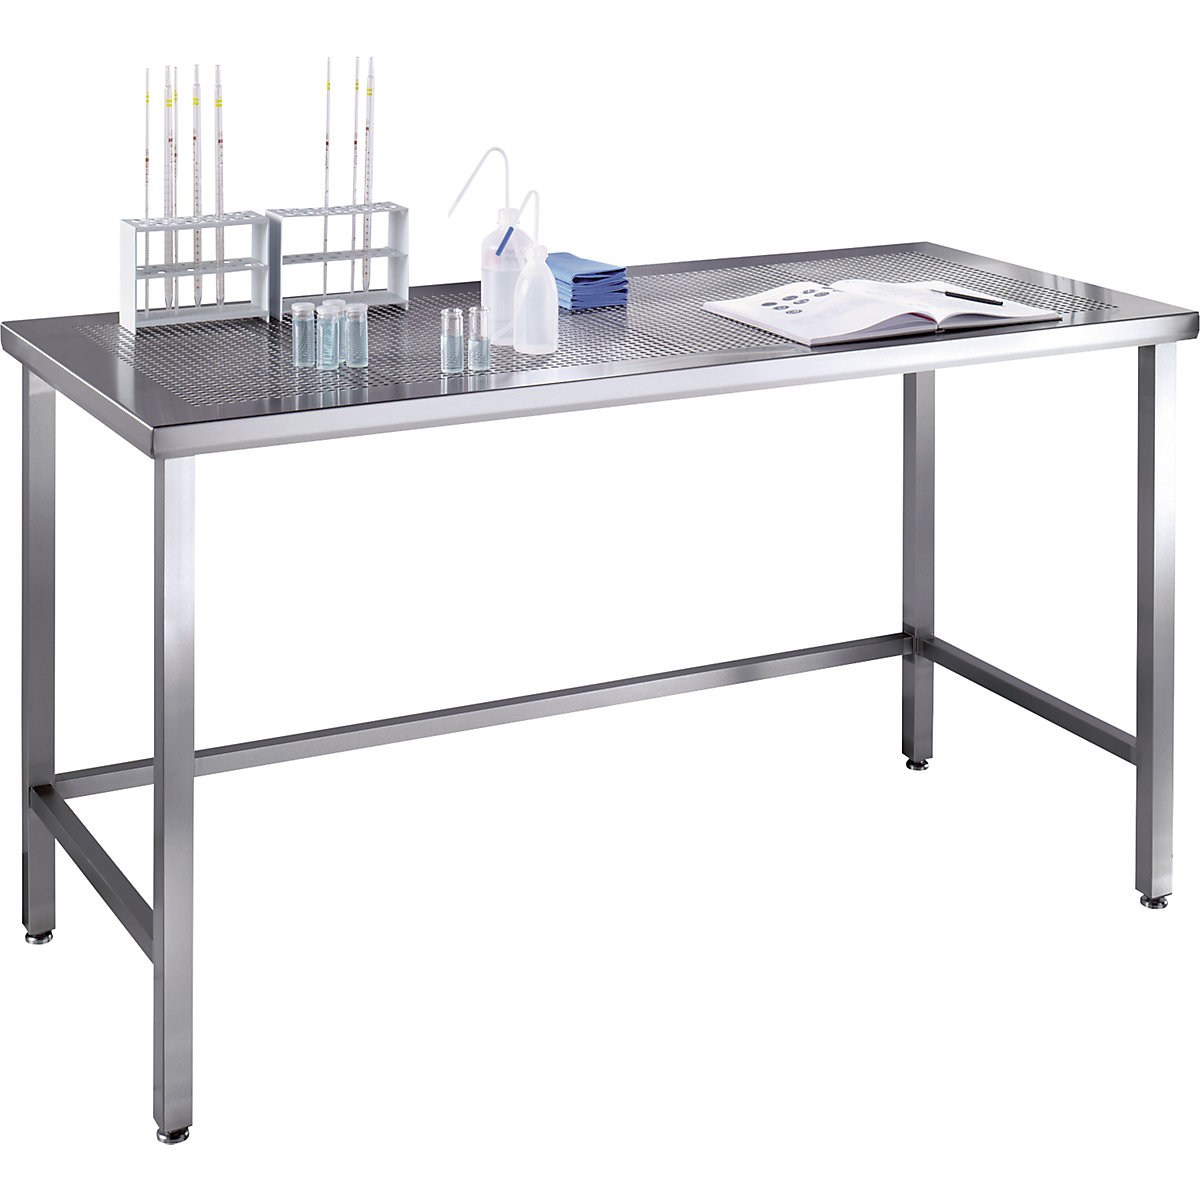 Stainless steel cleanroom table with perforated worktop